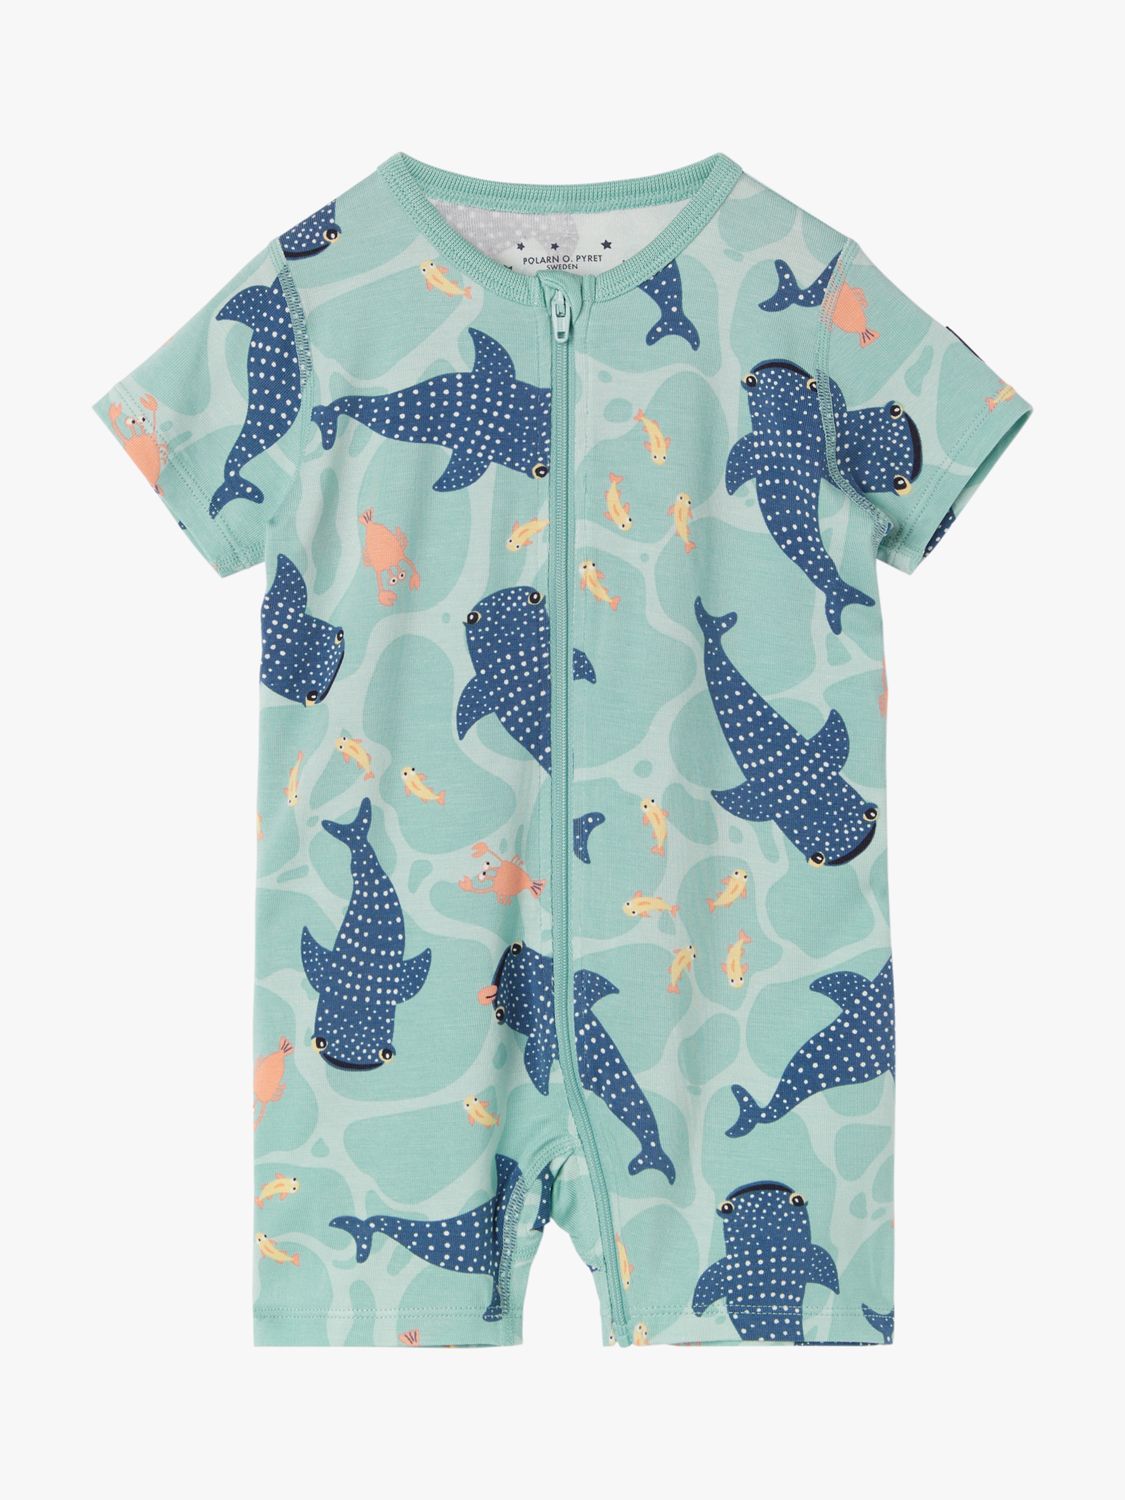 Polarn O. Pyret Baby Whale Print All-In-One Pyjamas, Blue, 0-2 months